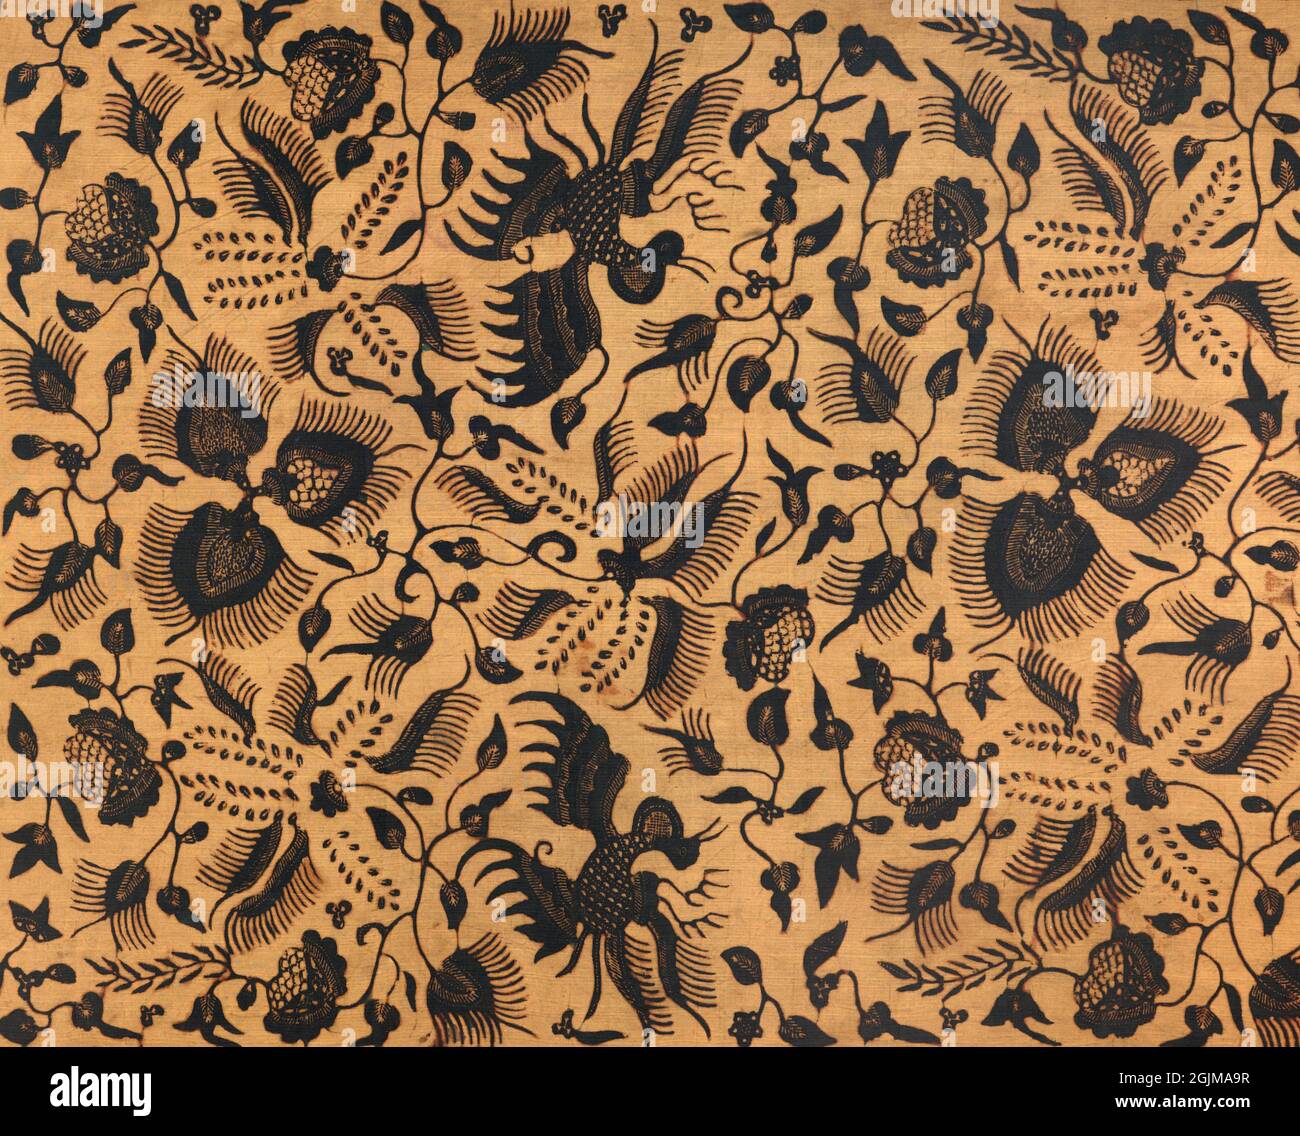 Detail of a Javanese Batik shoulder cloth (selendang) iwith an all-over leaf and flower pattern with birds. Chinese influence indicated by inclusion of the lokcan bird which is based on the phoenix. Java, Indonesia Stock Photo